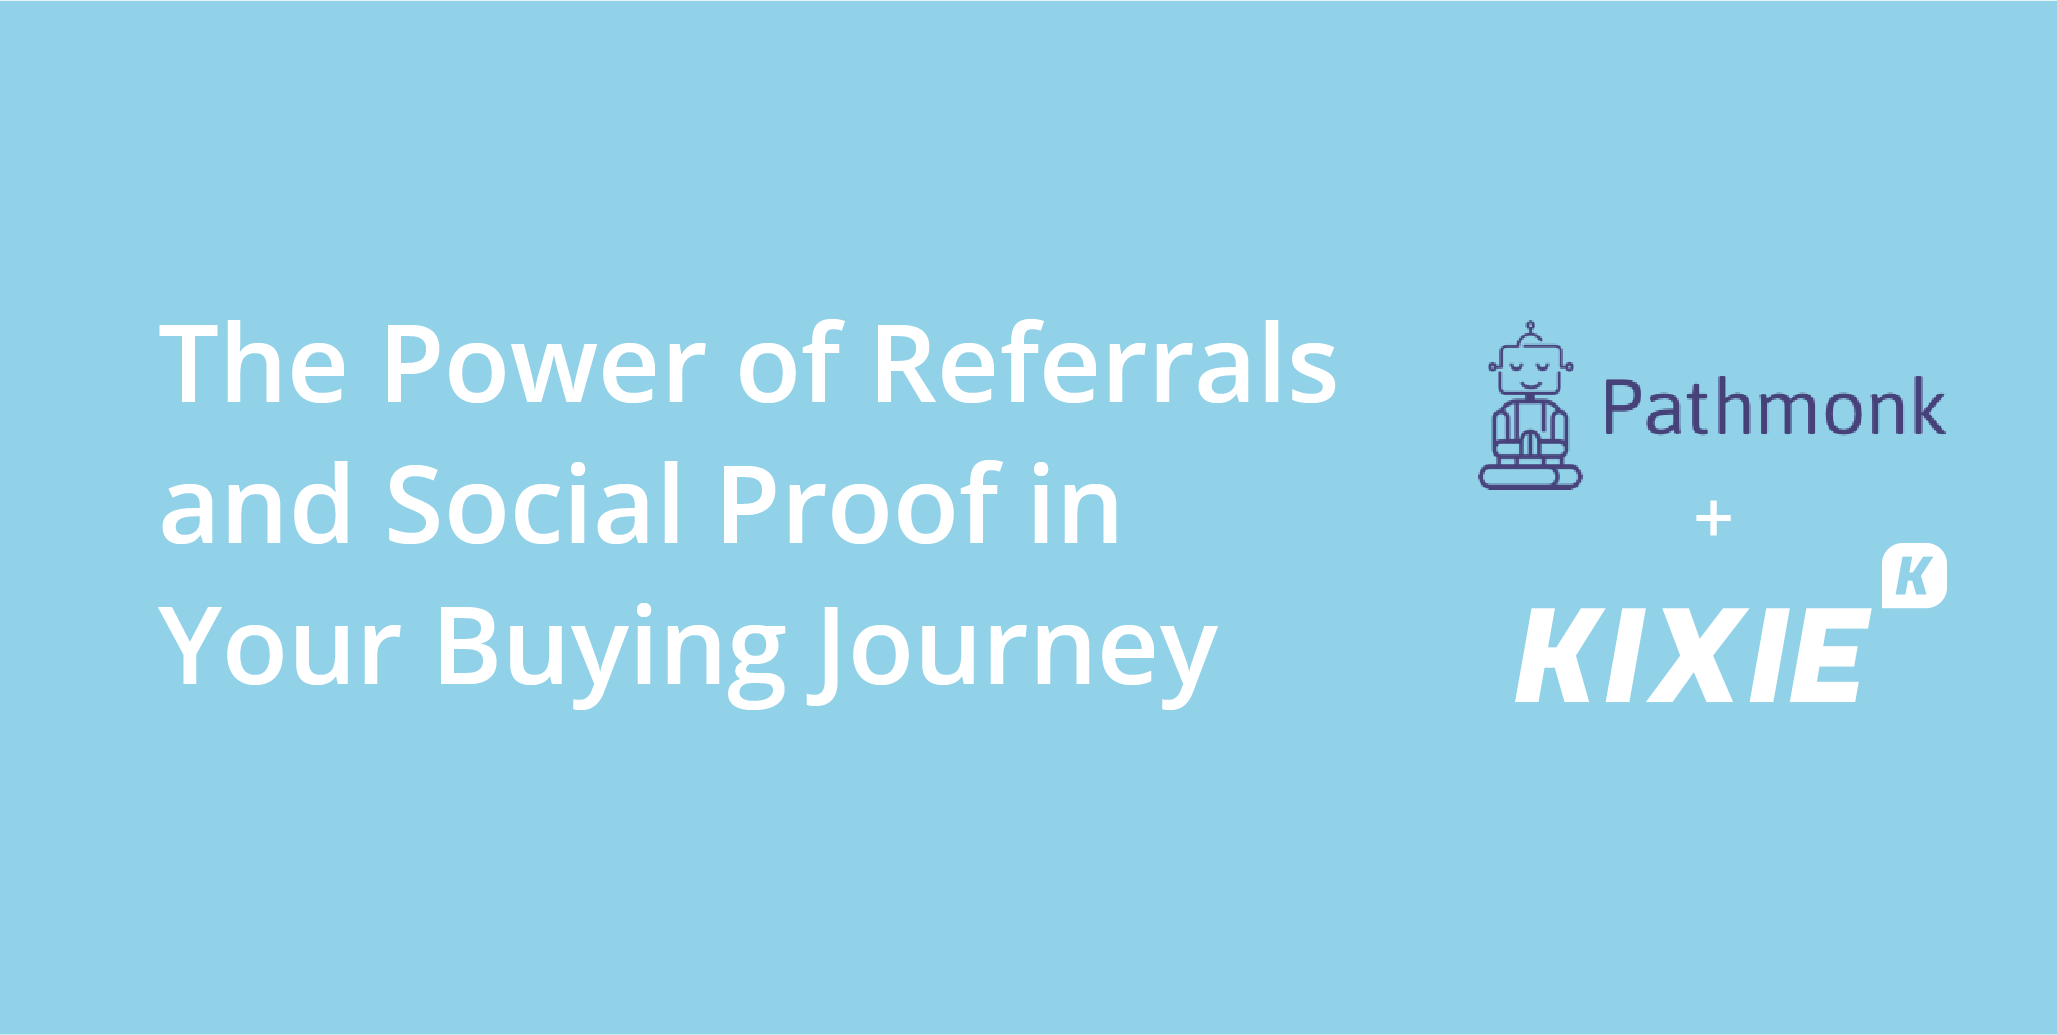 The Power of Referrals and Social Proof in Your Buying Journey | Pathmonk + Kixie | Telephones for business